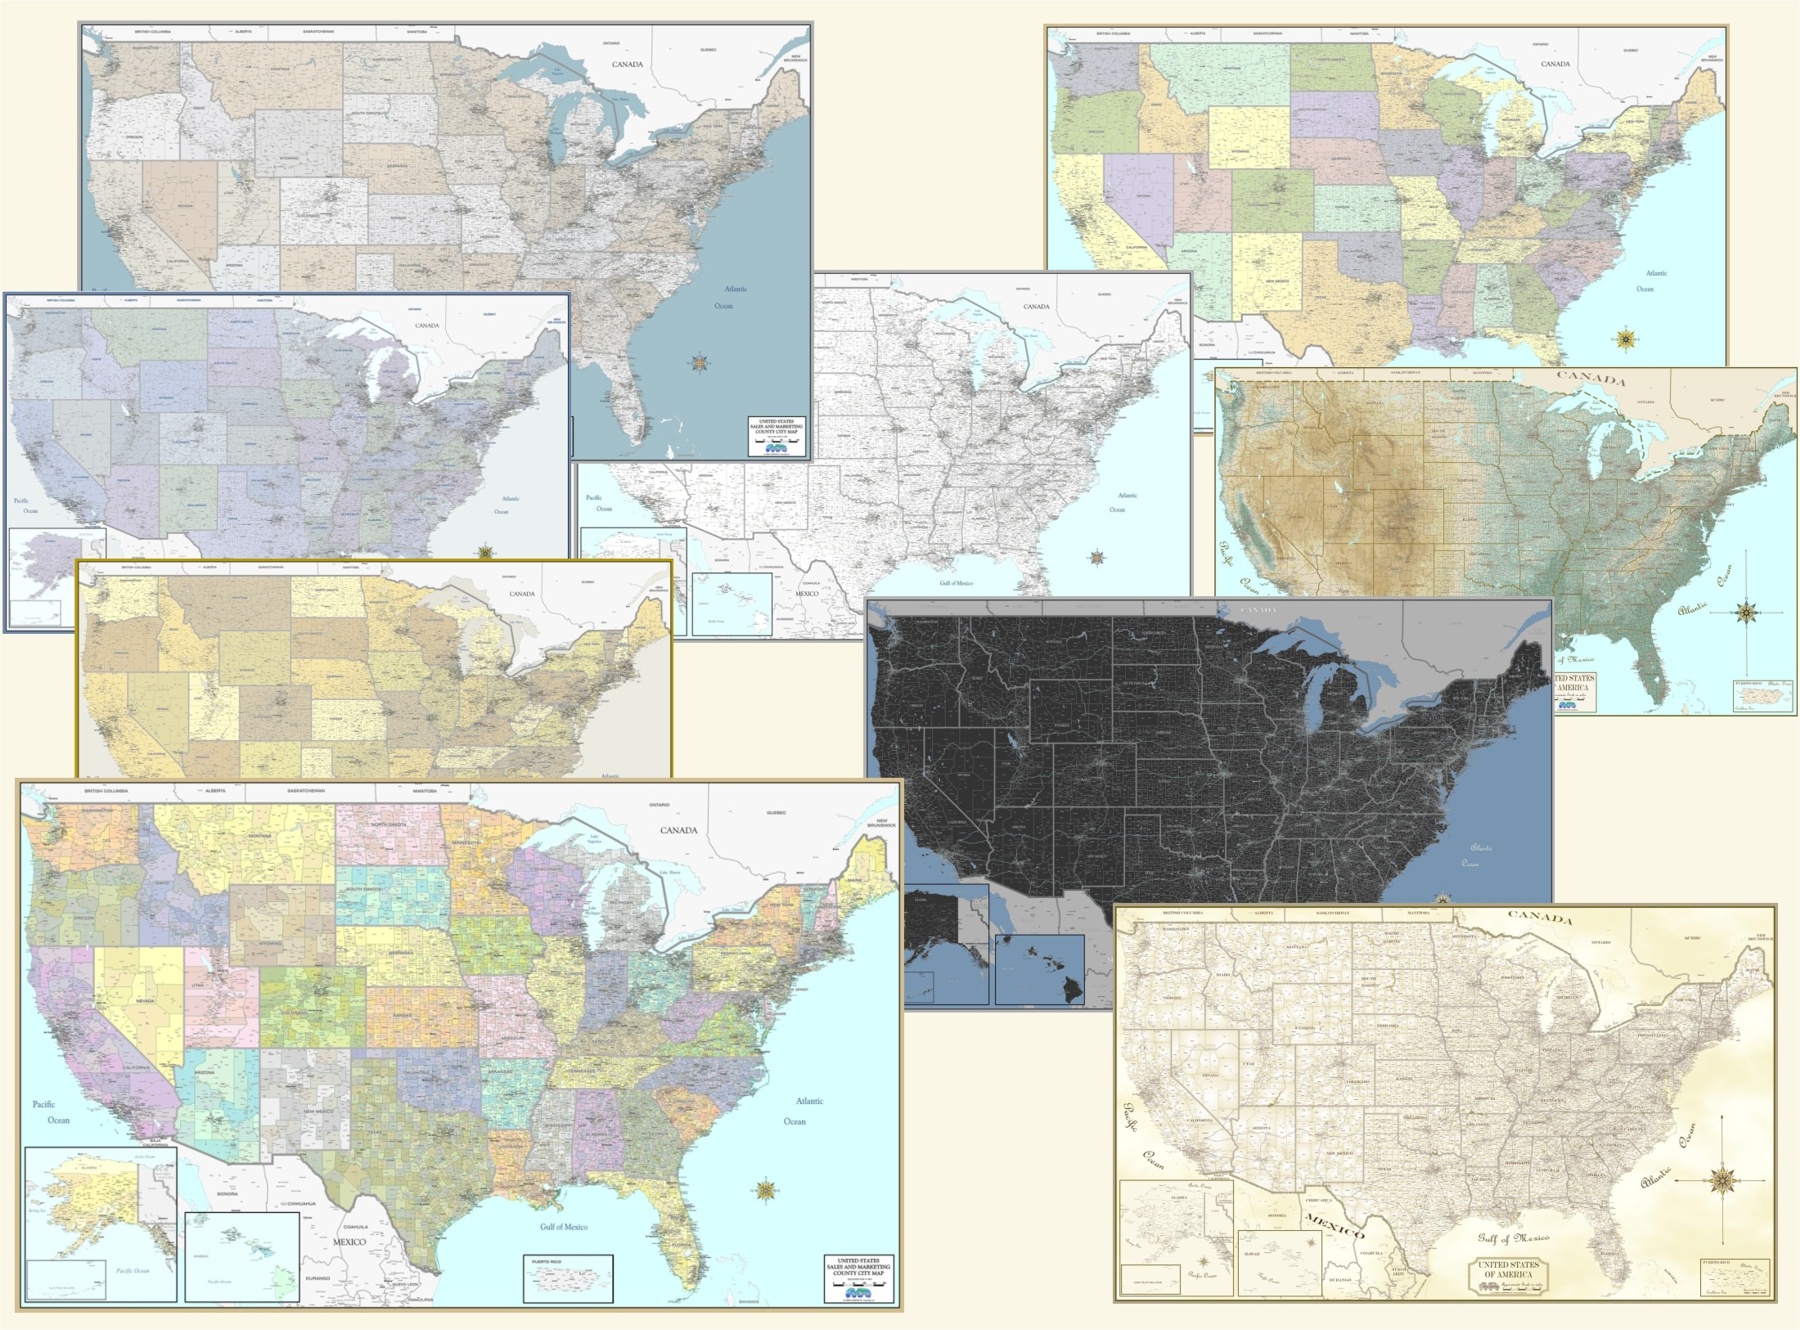 United States laminated wall maps in various beautiful colors and styles